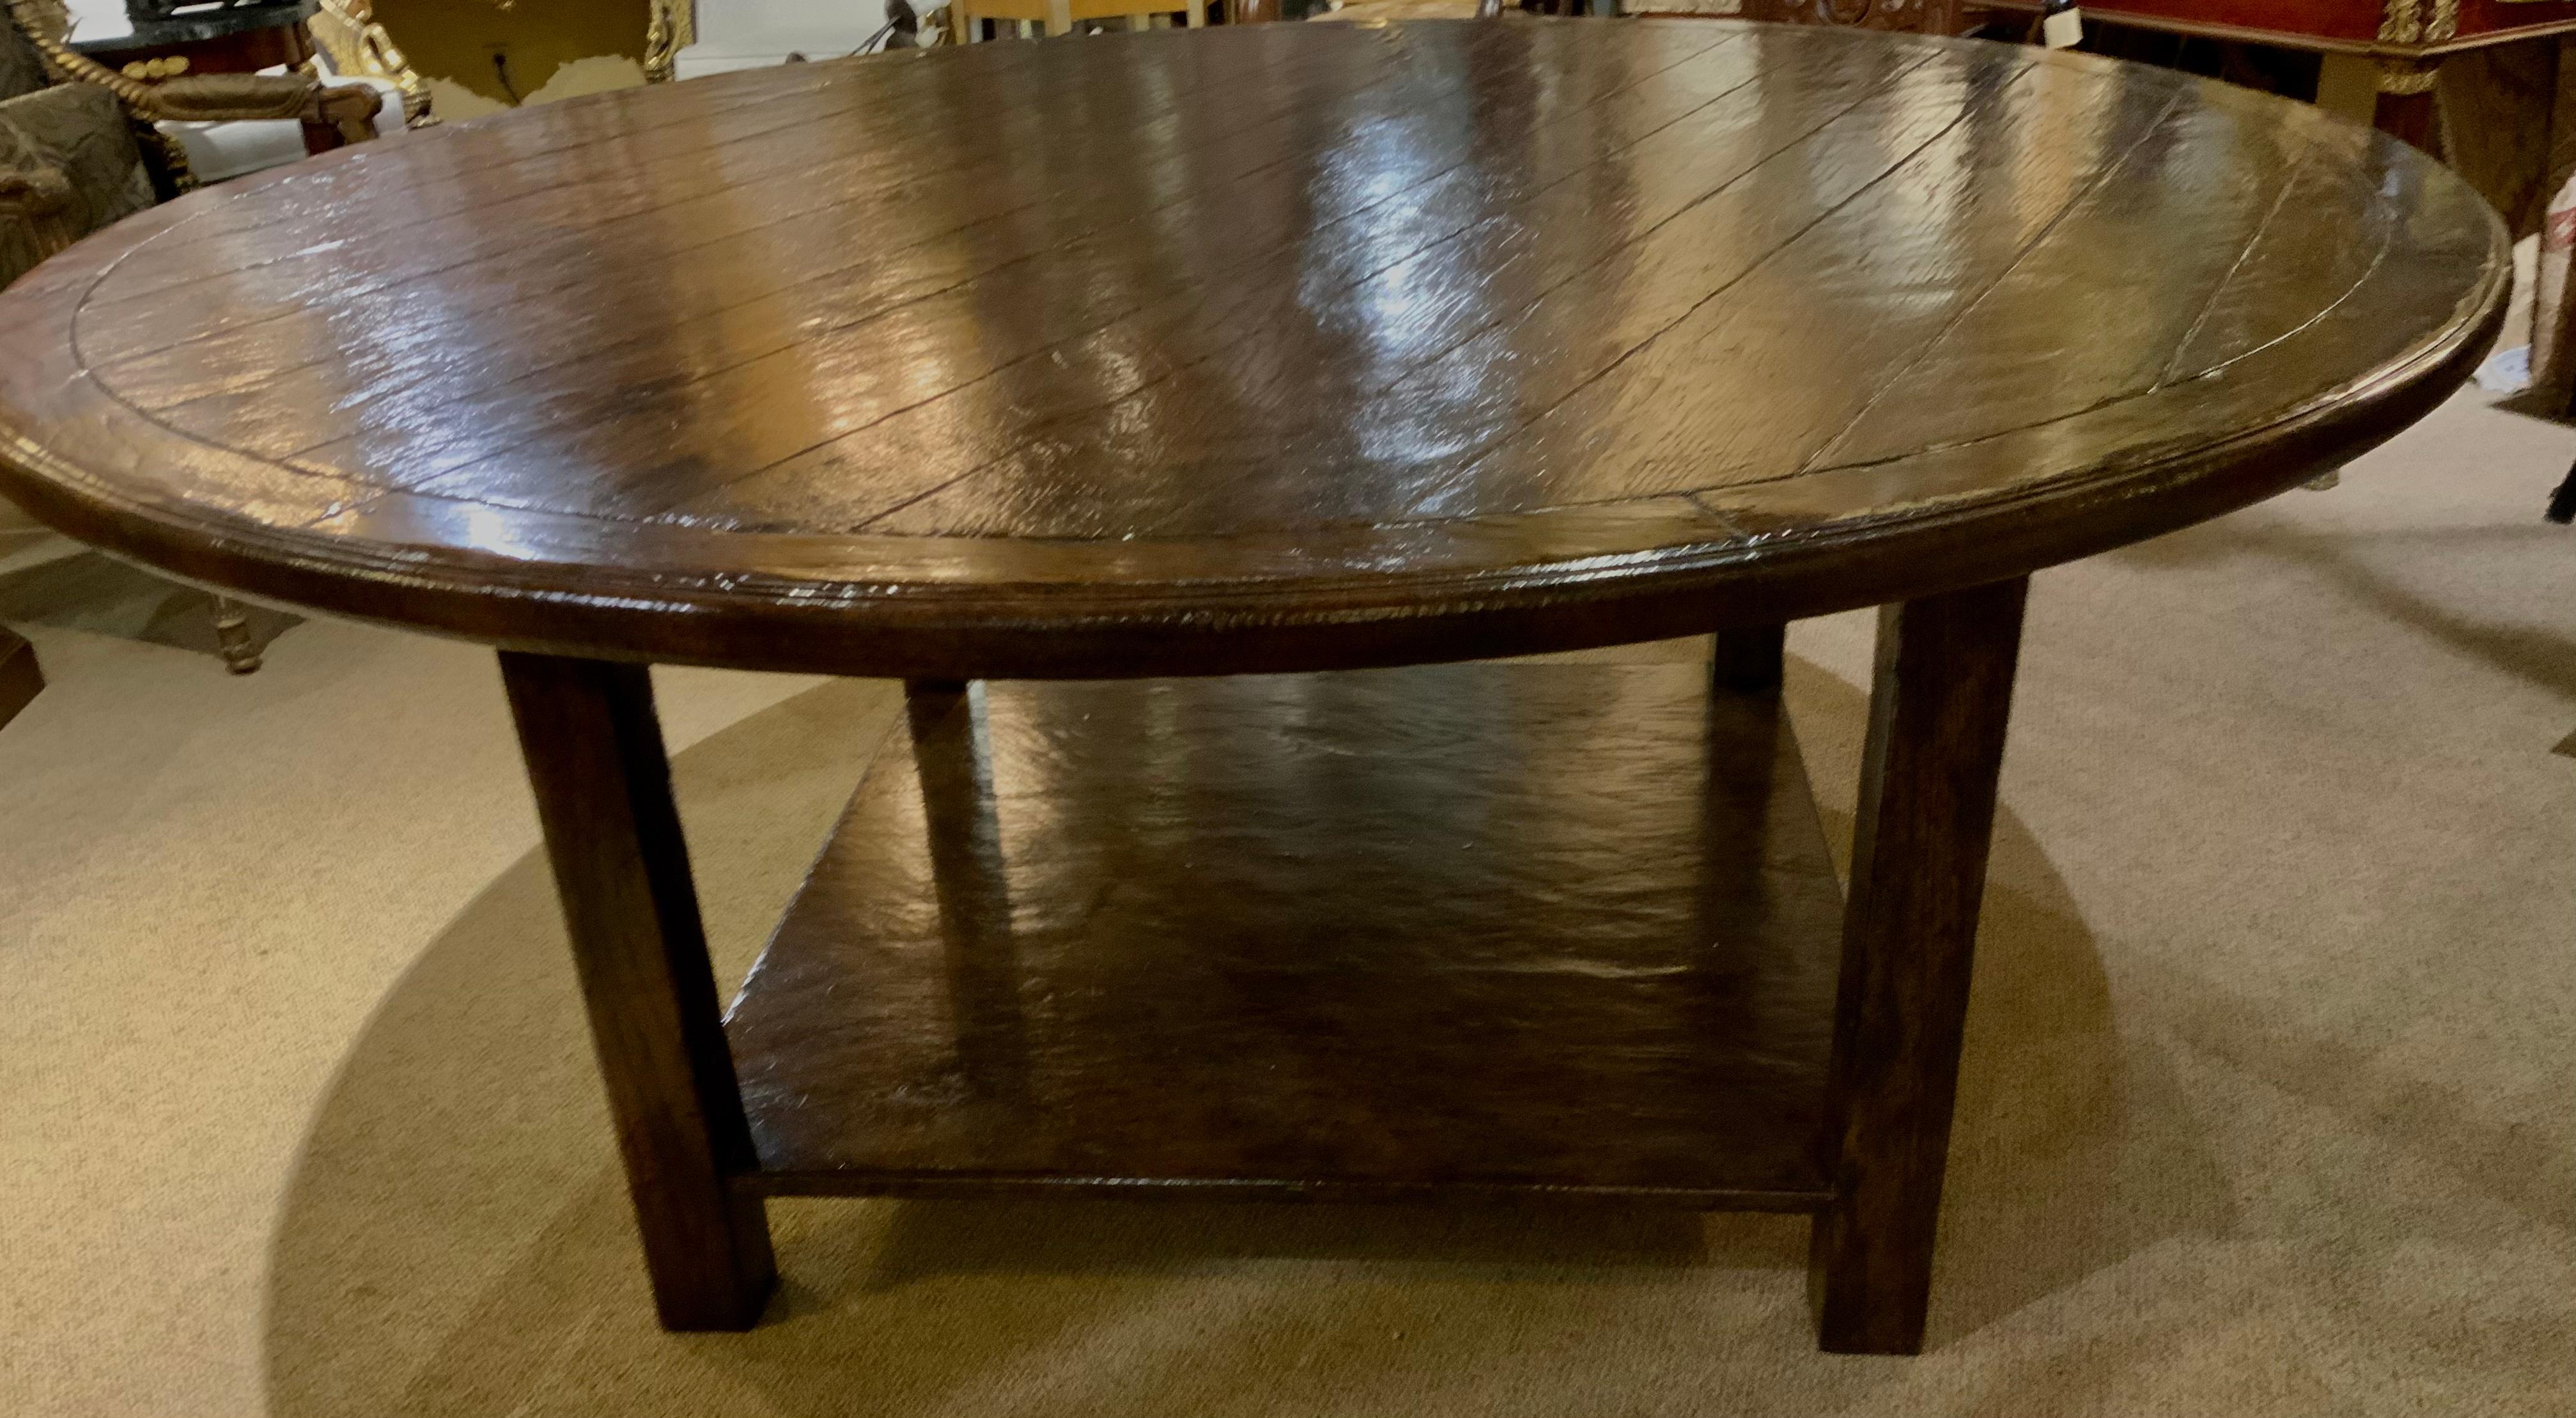 This large round table is well made. It was bench made, the top composed
Of oak boards in varying widths, set in a molded perimeter, raised on a square
Pedestal, the heavy heavy square legs joined by beaded boards and
Pegged construction, and